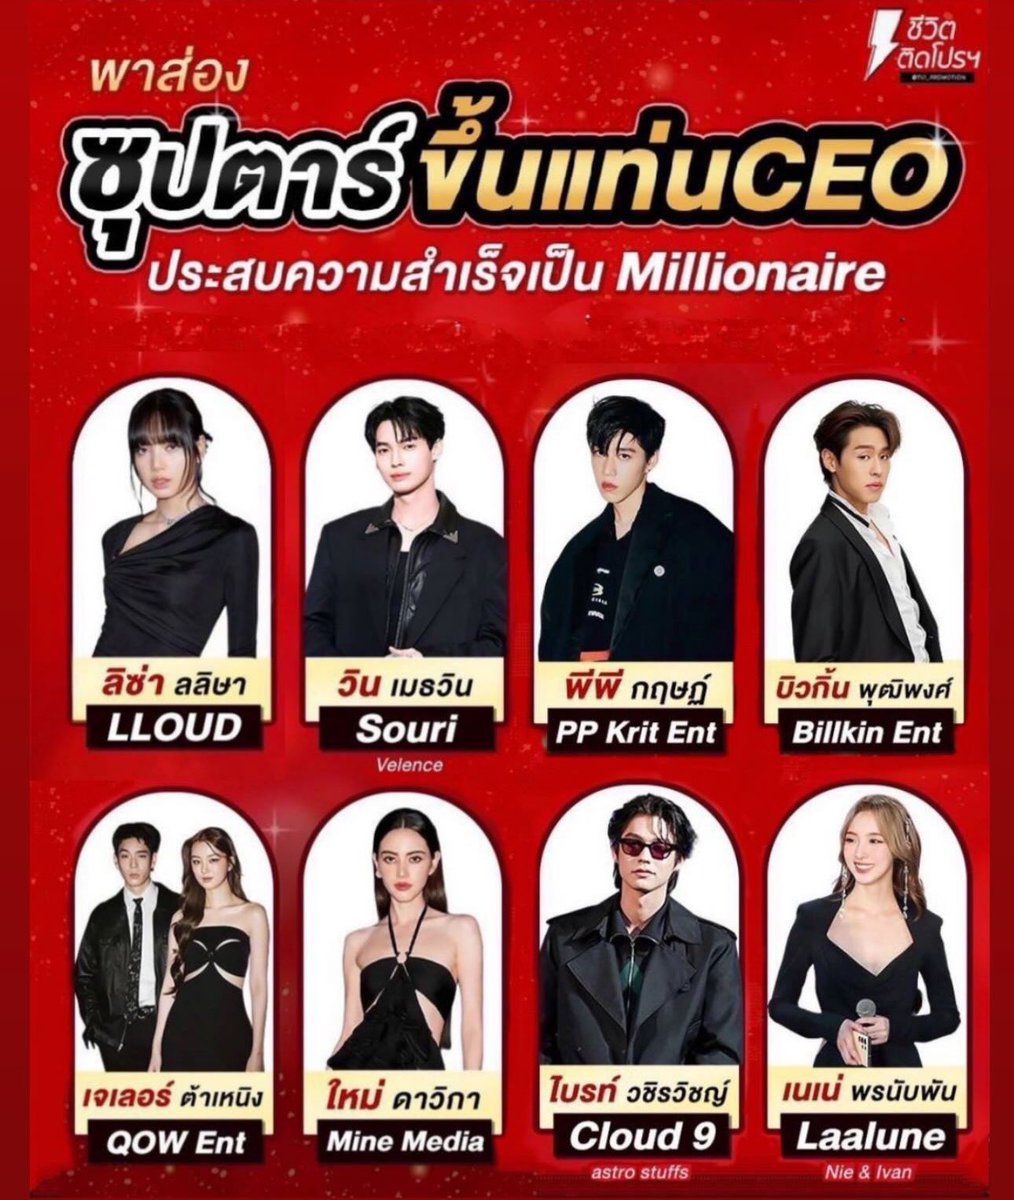 From superstar to CEO! #LISA and #WinMetawin just became a millionaire, leading the way in Thailand's business scene. What can't they do?  #LLOUD